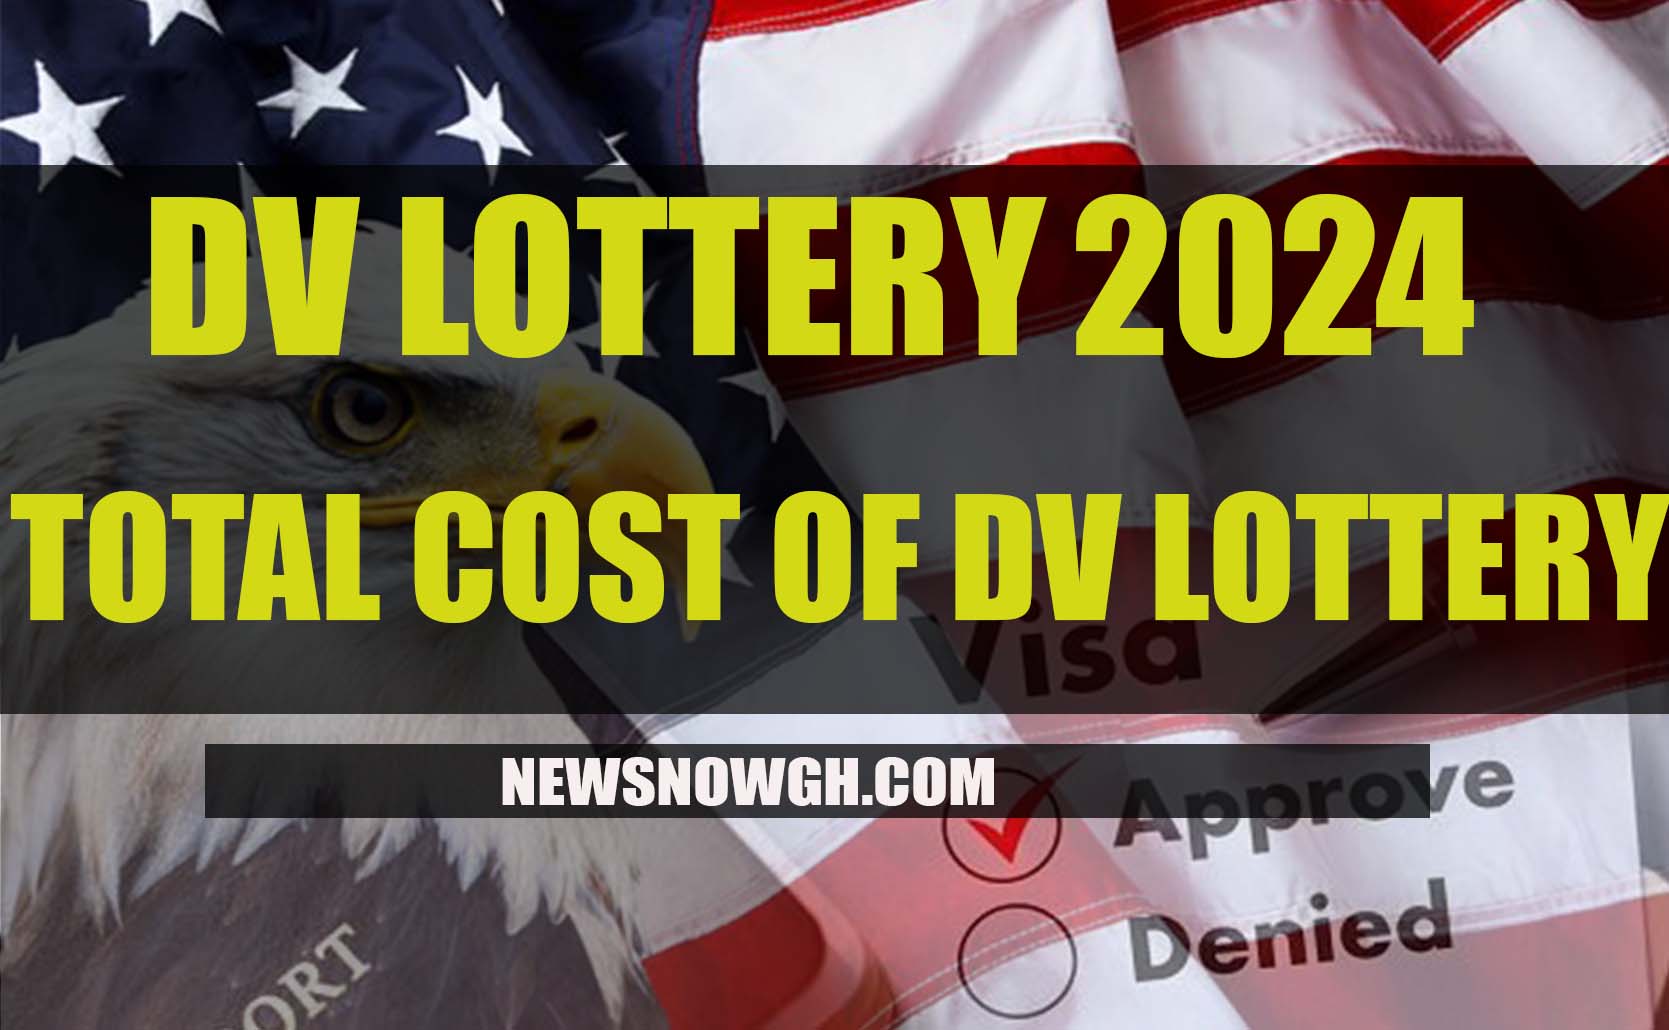 TOTAL COST OF DV LOTTERY VISA